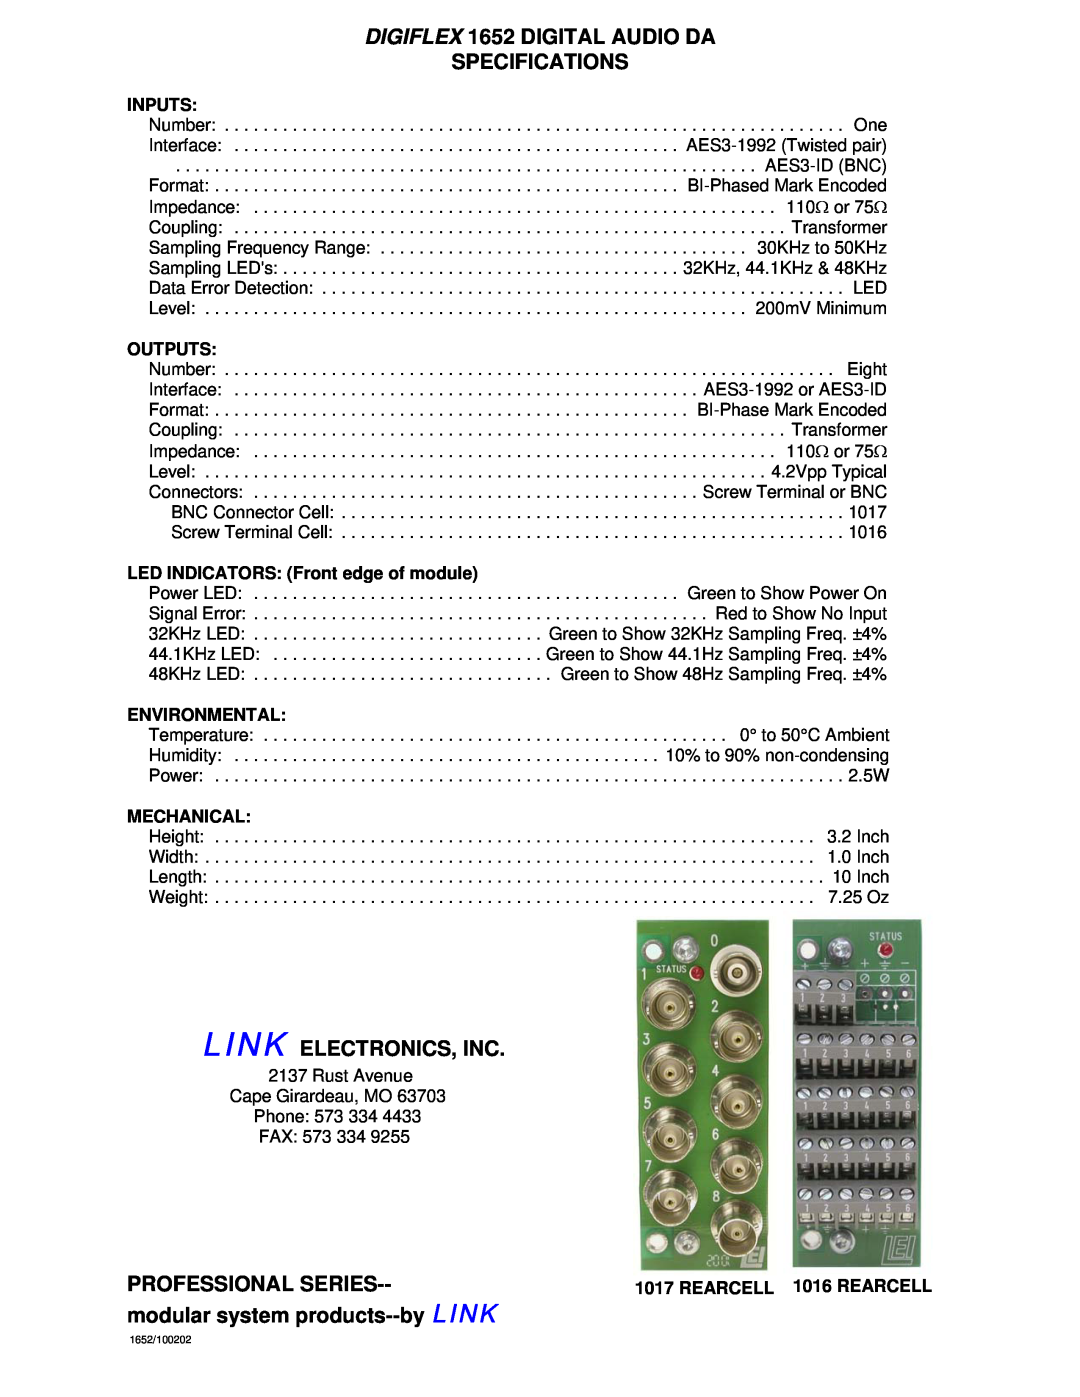 Link electronic 1652 Inputs, Outputs, LED INDICATORS Front edge of module, Environmental, Mechanical, Professional Series 